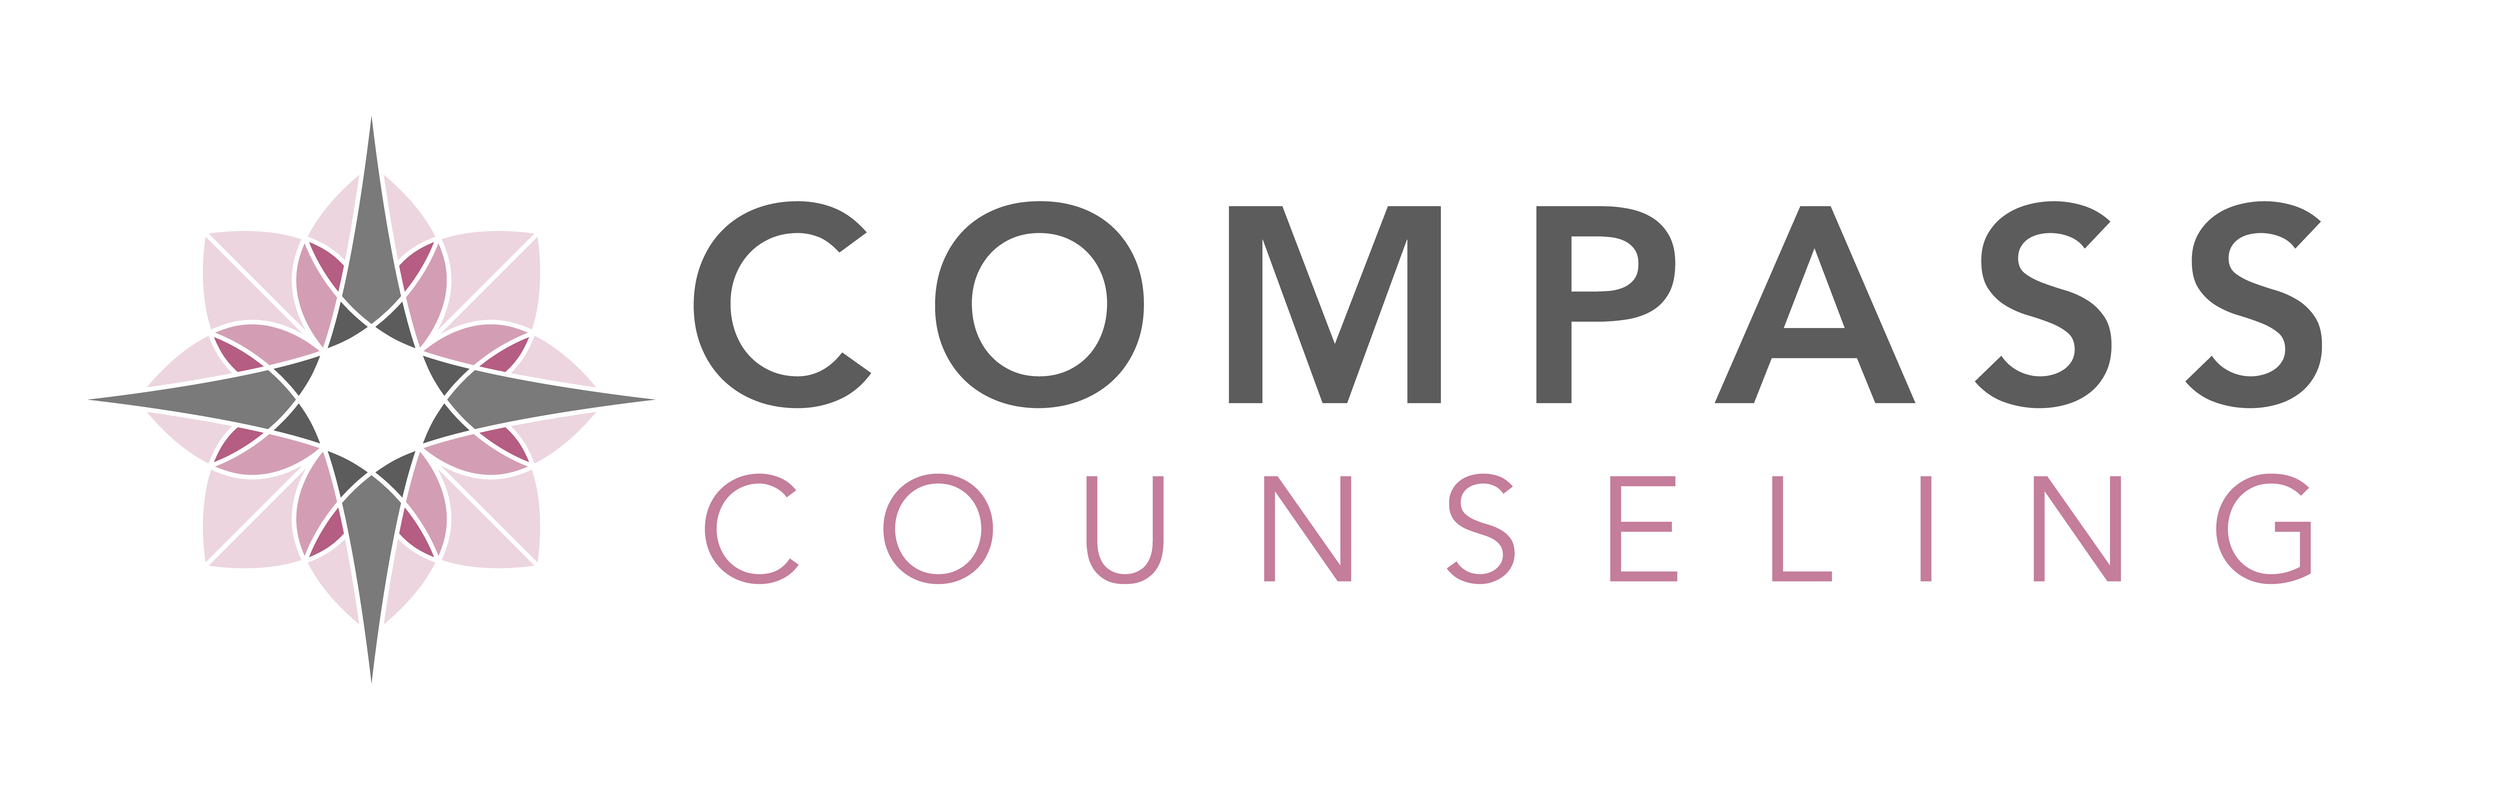 COMPASS COUNSELING